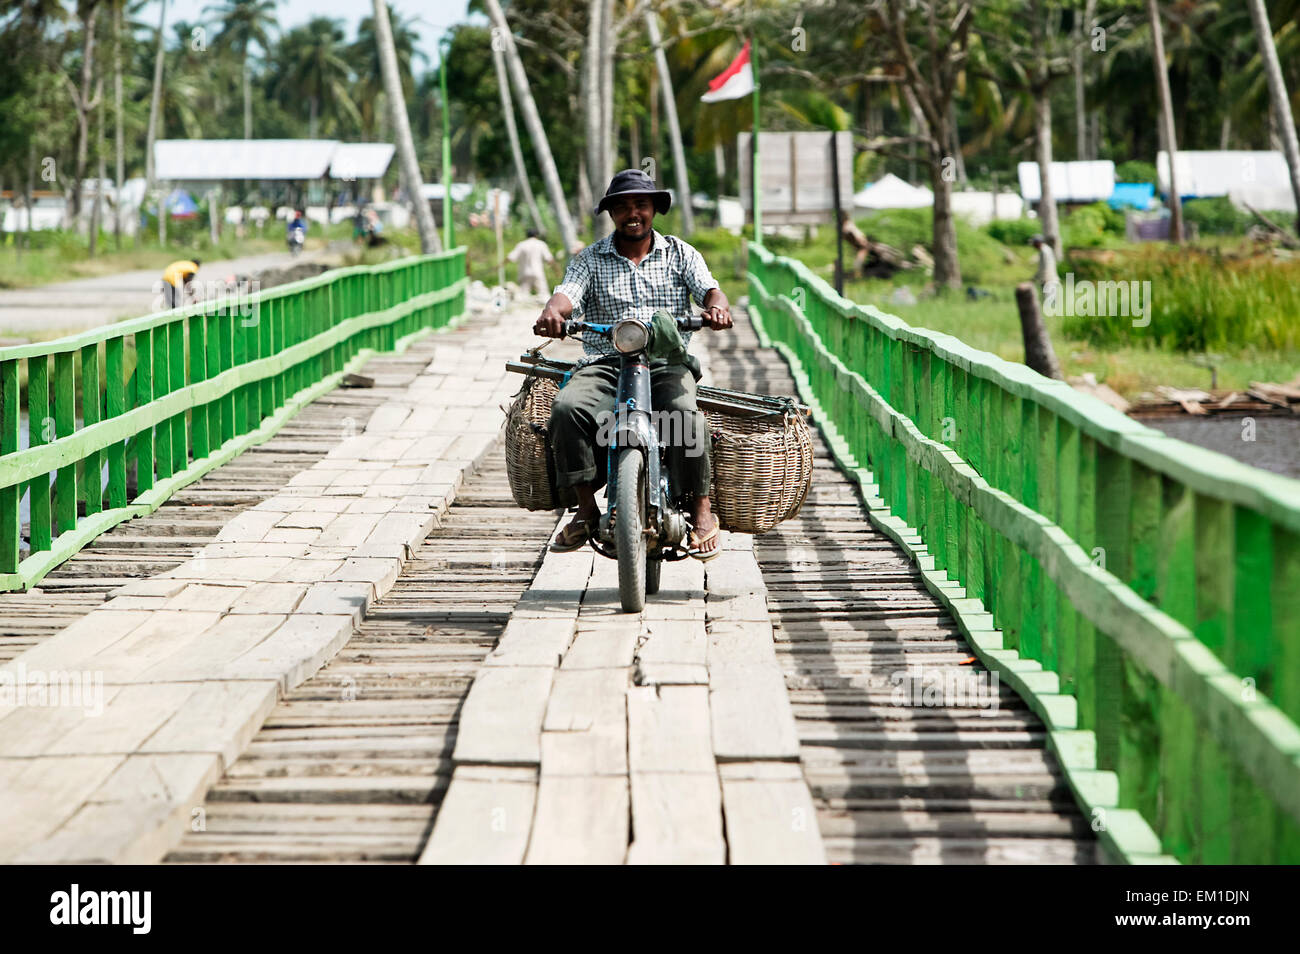 Motorbike crossing a temporary bridge made of wood after the Indian Ocean tsunami in 2004; Sumatra, Indonesia Stock Photo